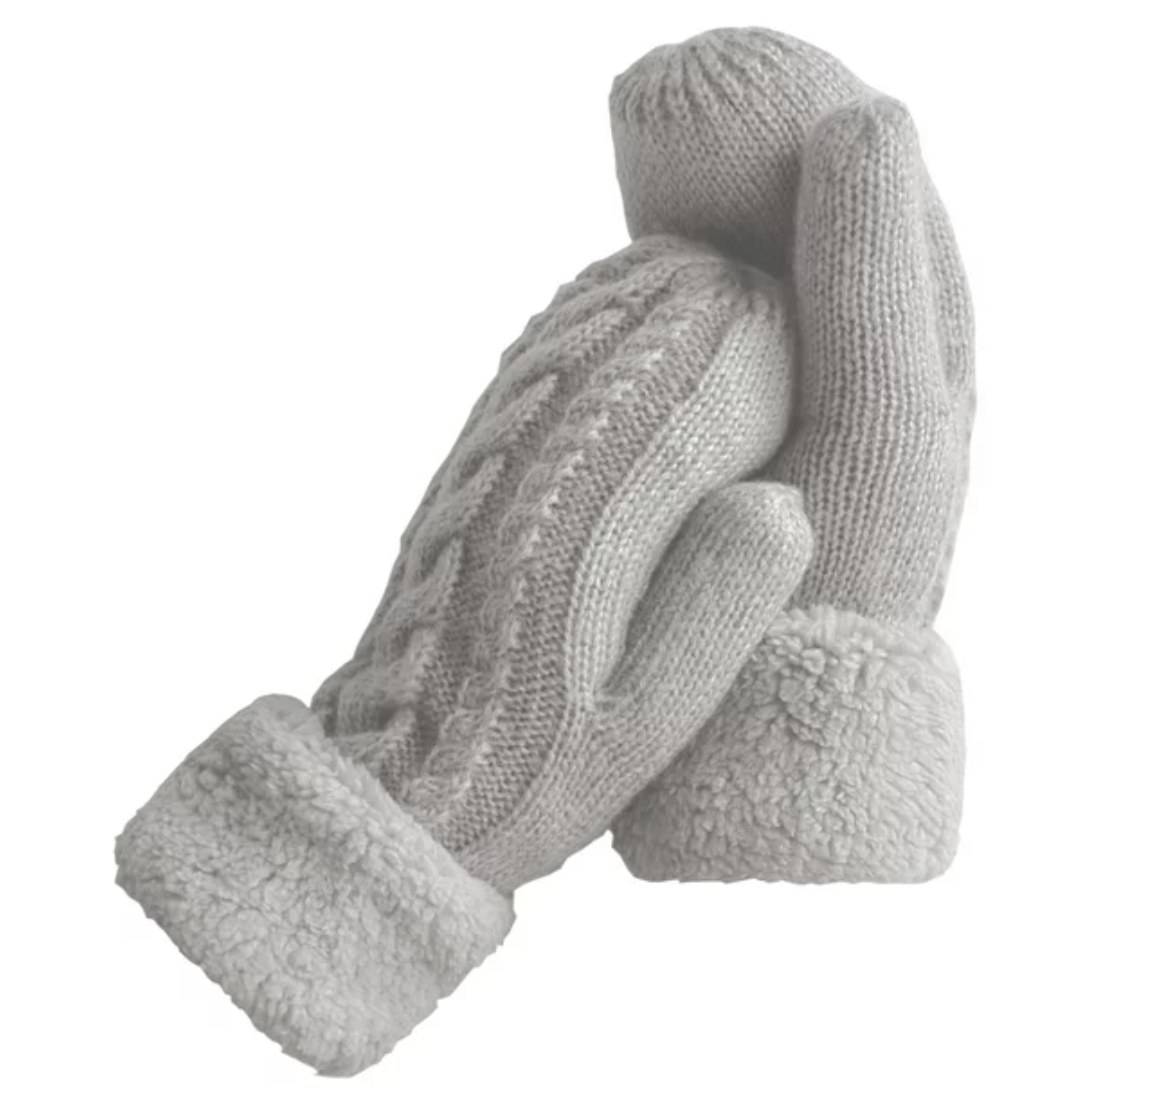 A pair of grey wool knit mittens